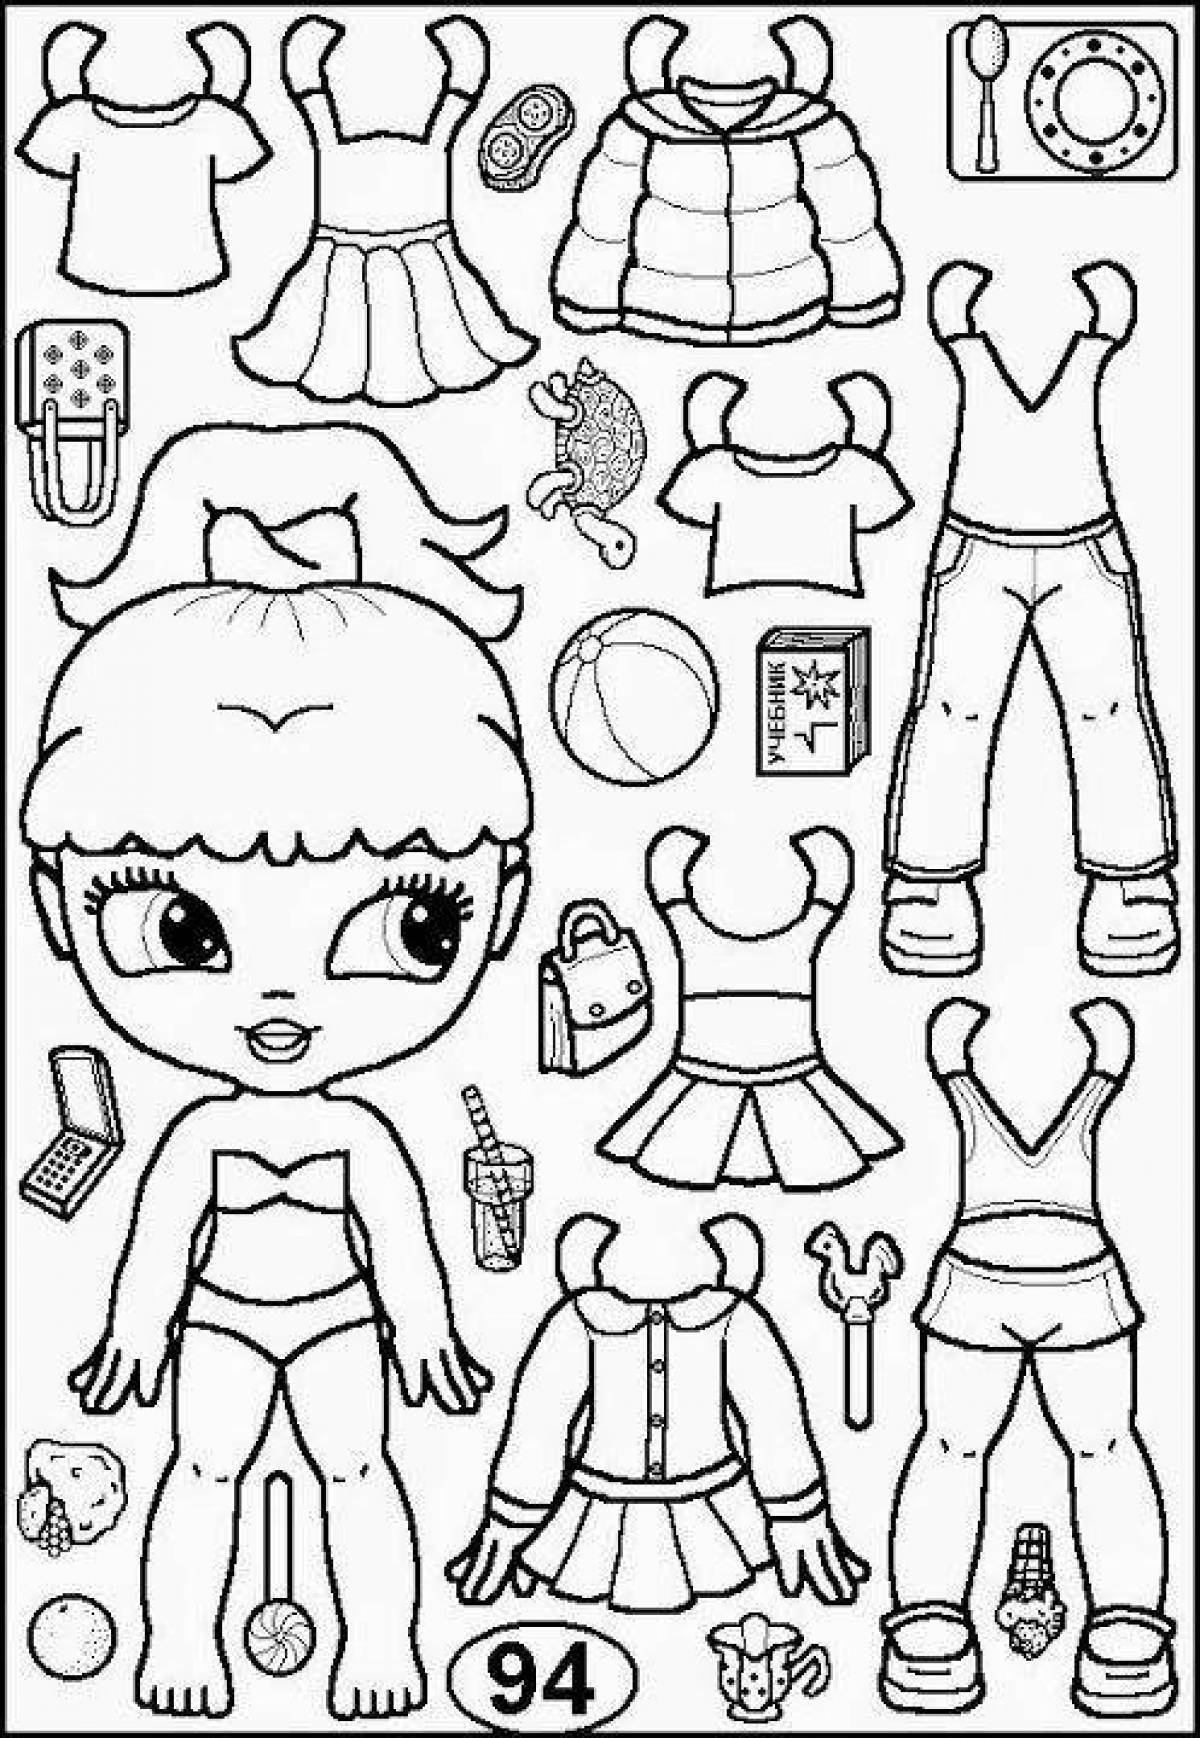 Bright coloring lol doll with clothes